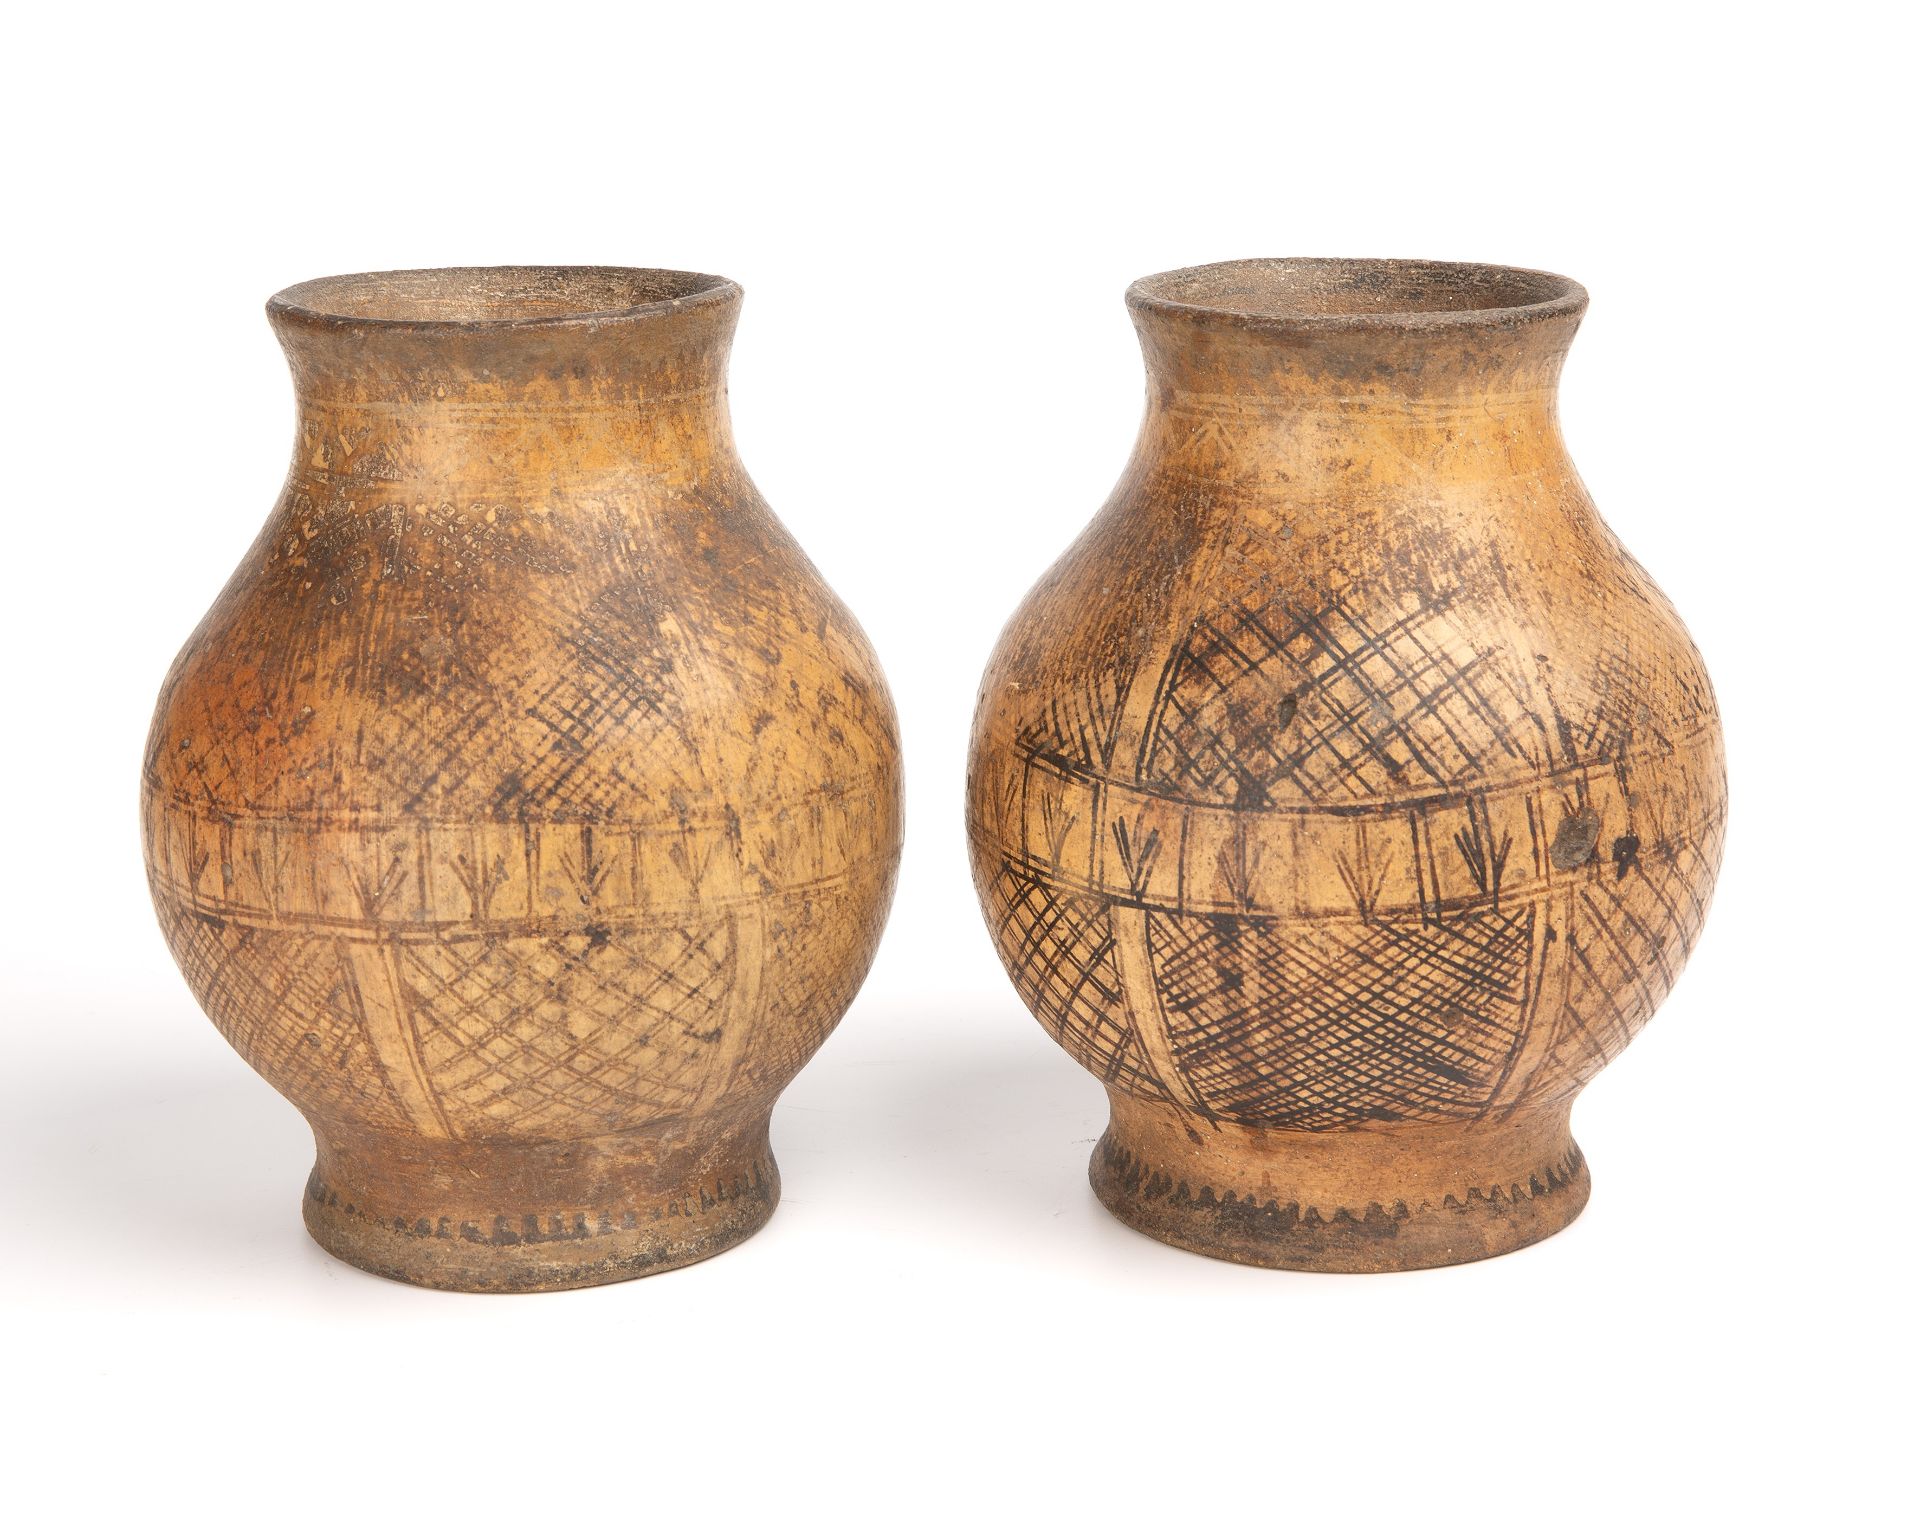 Two early bronze age pottery vessels 3000bc each 15cm wide 18cm high with a dealers certificate - Bild 2 aus 5